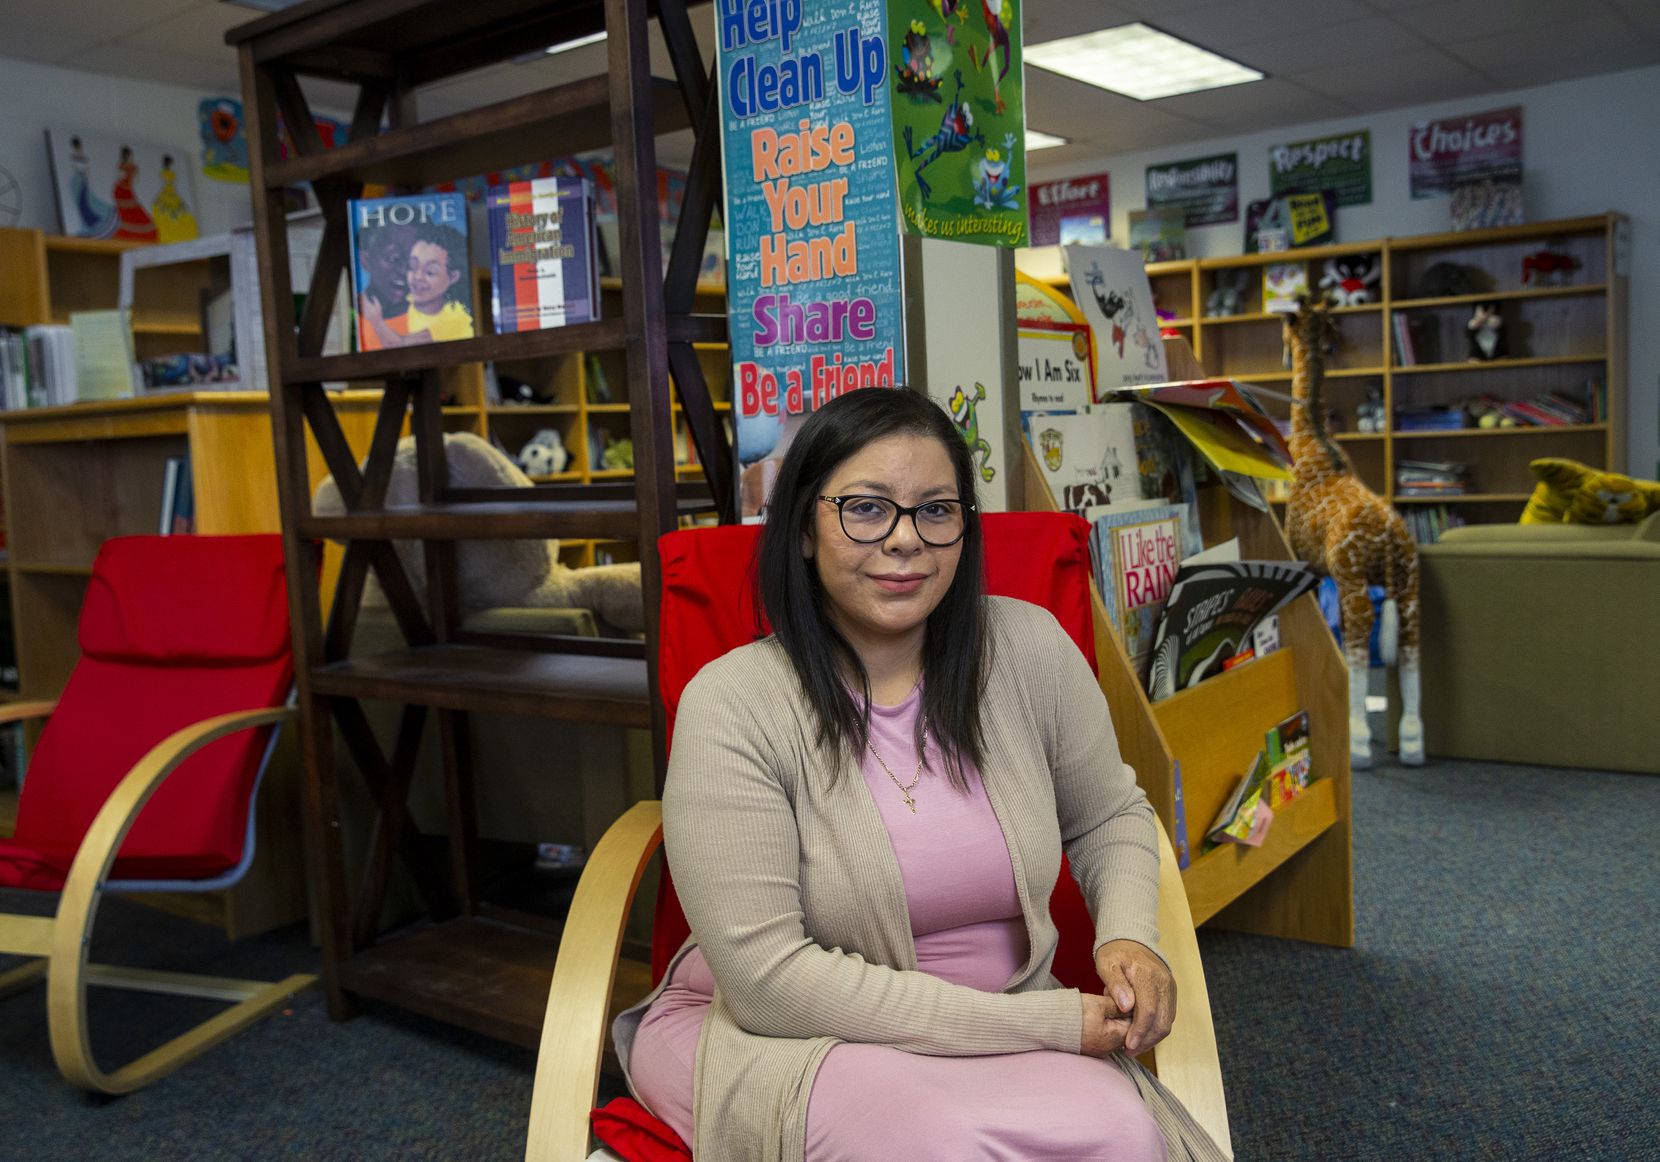 Jessica Hernandez, a DACA recipient and community liaison at S.S. Conner Elementary School, poses for a portrait at the campus in Dallas on Friday, Nov. 9, 2019. The Supreme Court will hear arguments Tuesday about DACA’s legality. Hernandez said that without DACA, her career would be irreparably disrupted. (Lynda M. Gonzalez/The Dallas Morning News)